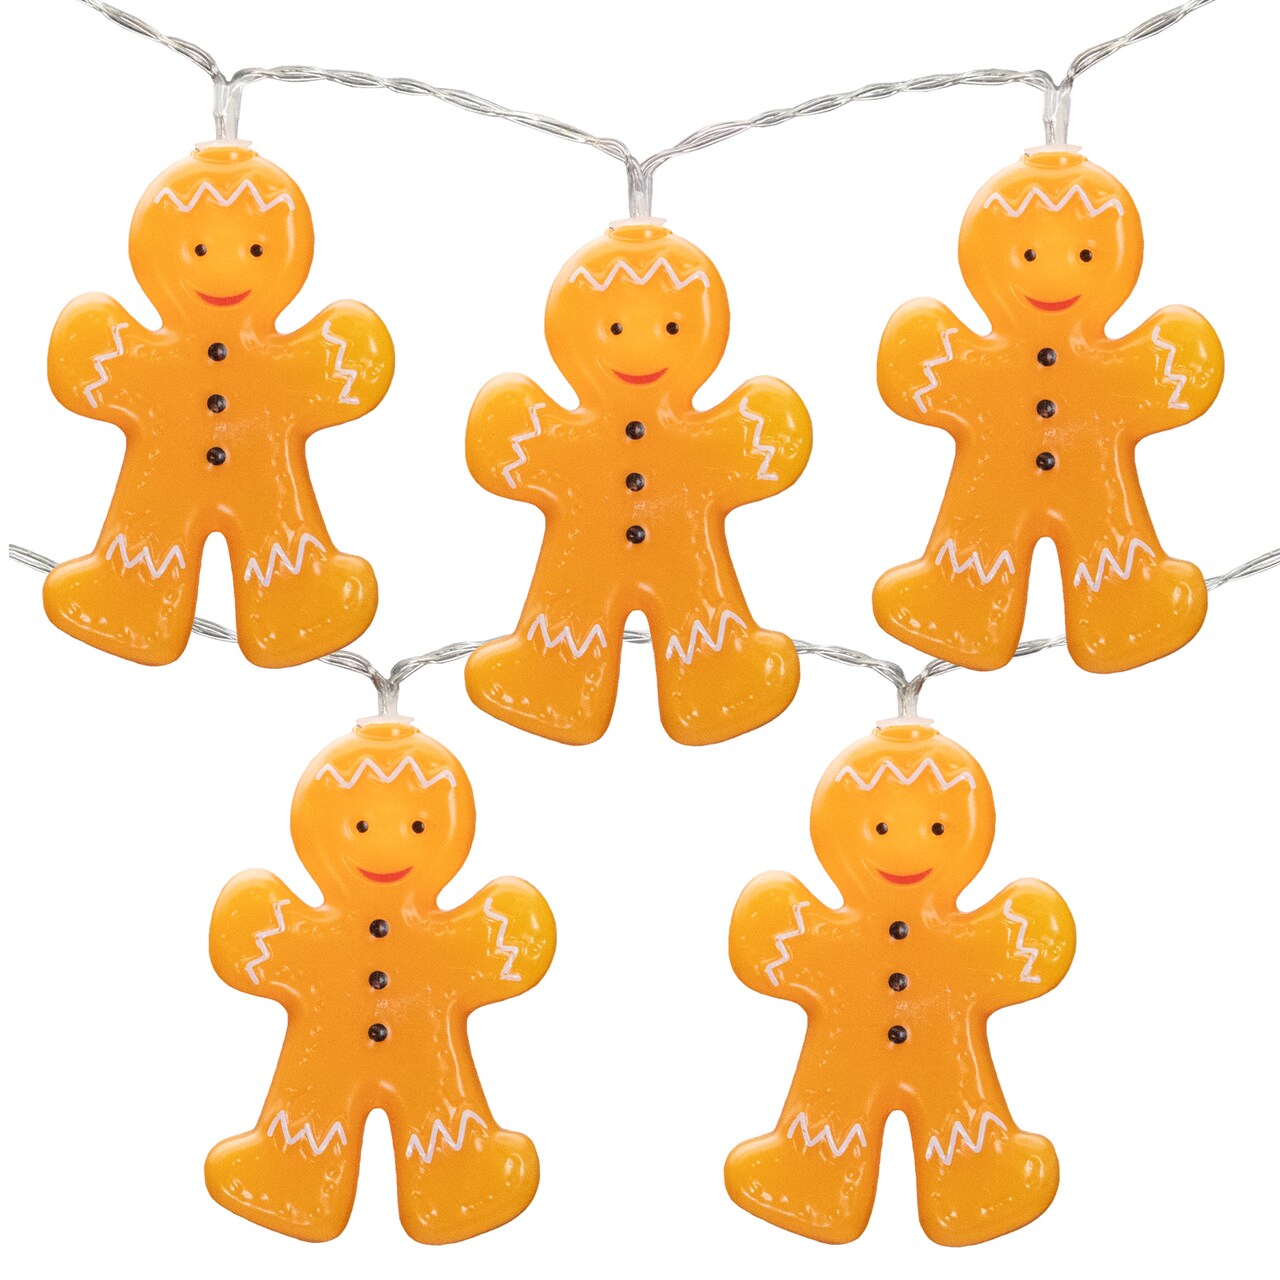 Northlight 10-Count LED Orange Gingerbread Men Christmas Fairy Lights, 4ft, Copper Wire